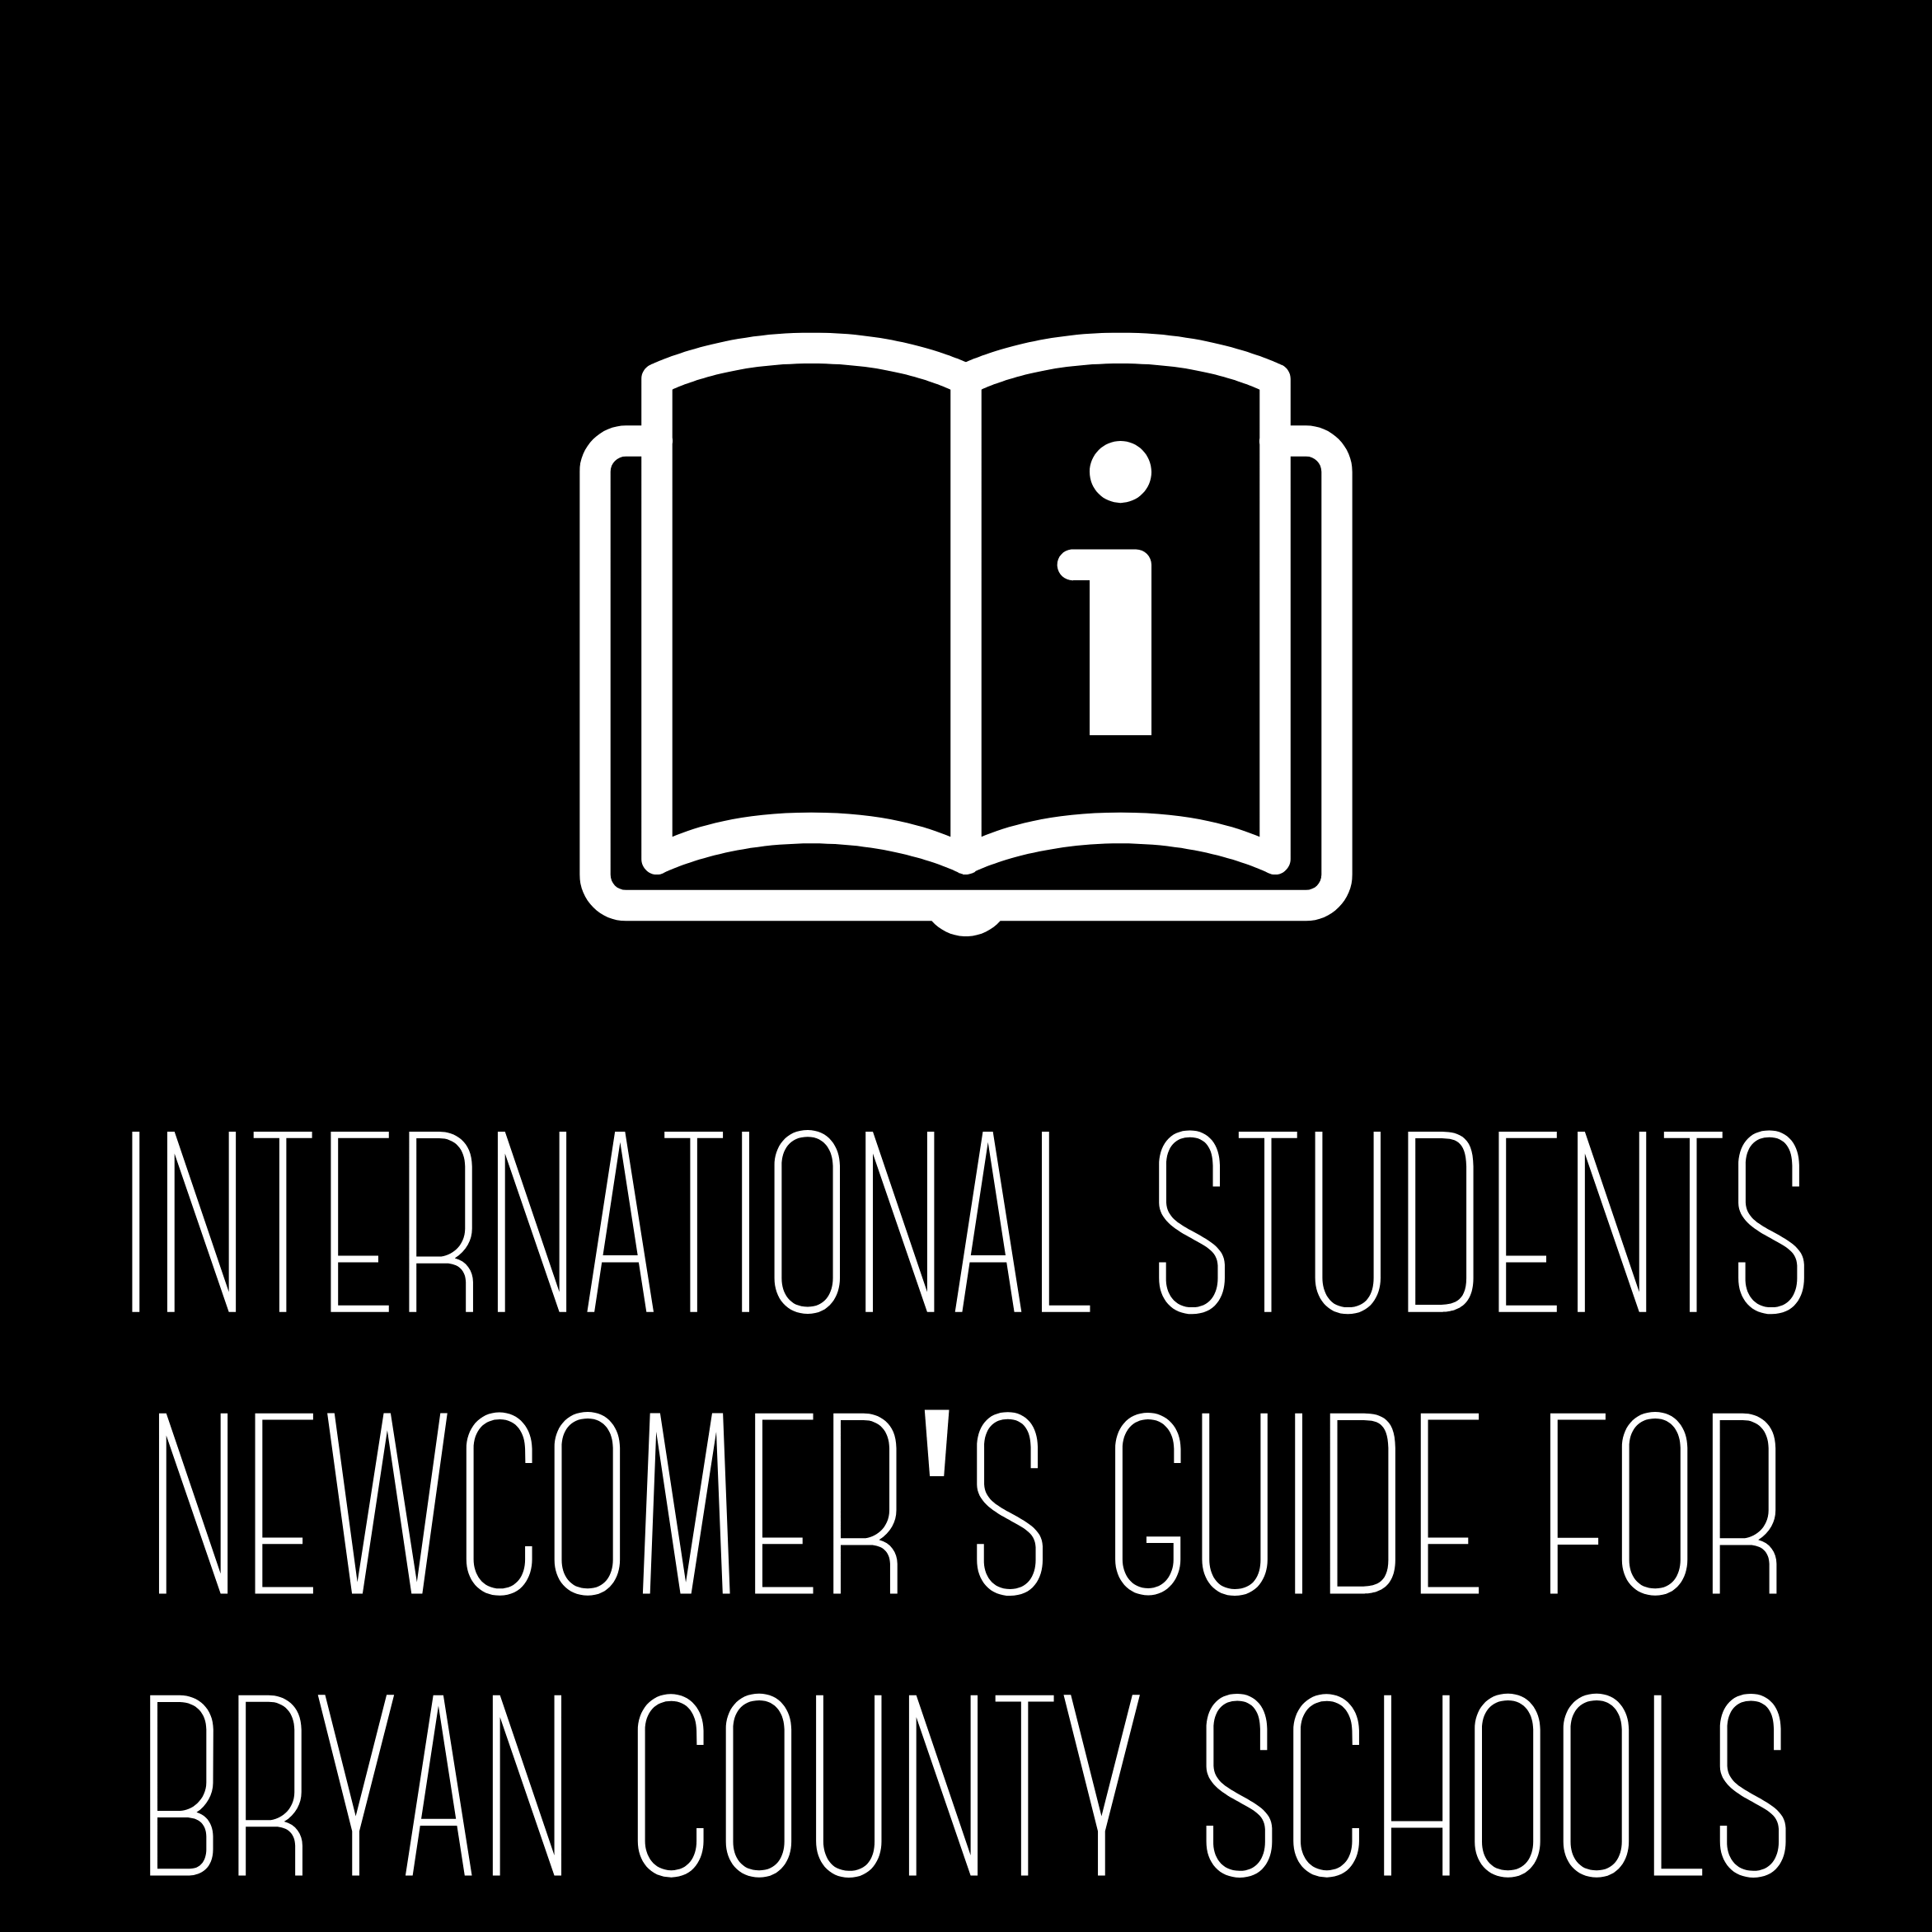 International Students Newcomer's Guide for Bryan County Schools